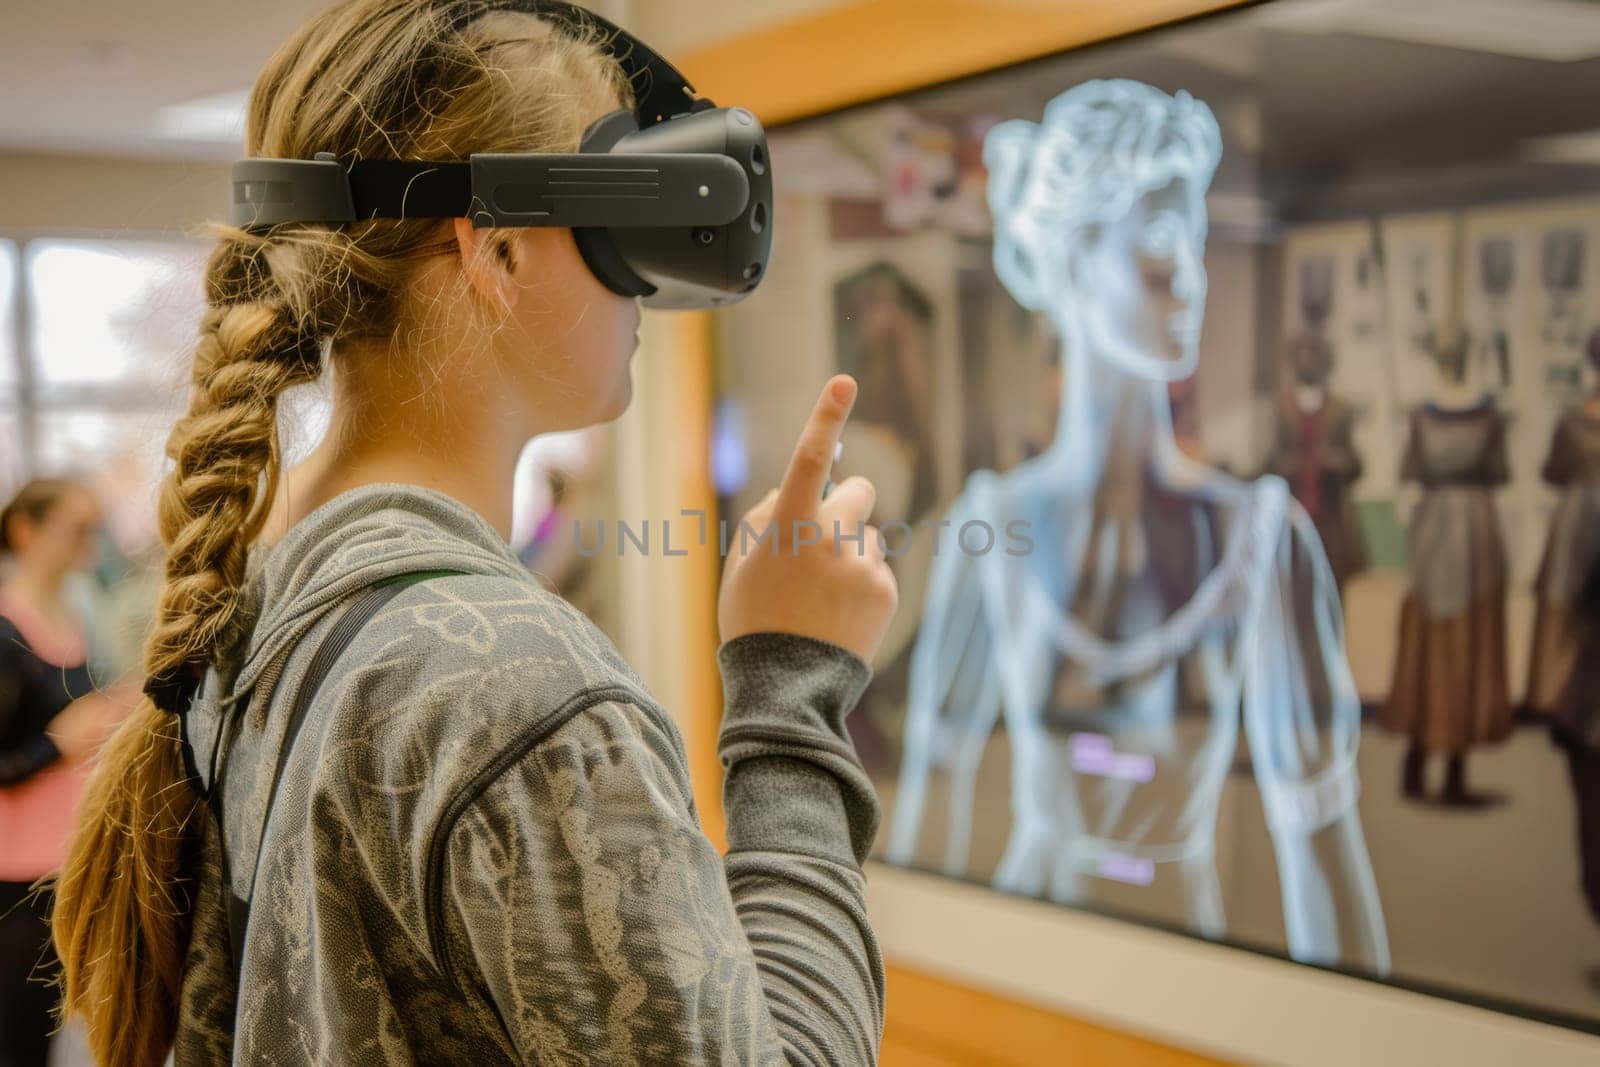 Students use augmented reality technology to witness historical events, engaging deeply with the past. The classroom becomes a time machine, where learning is both interactive and profound